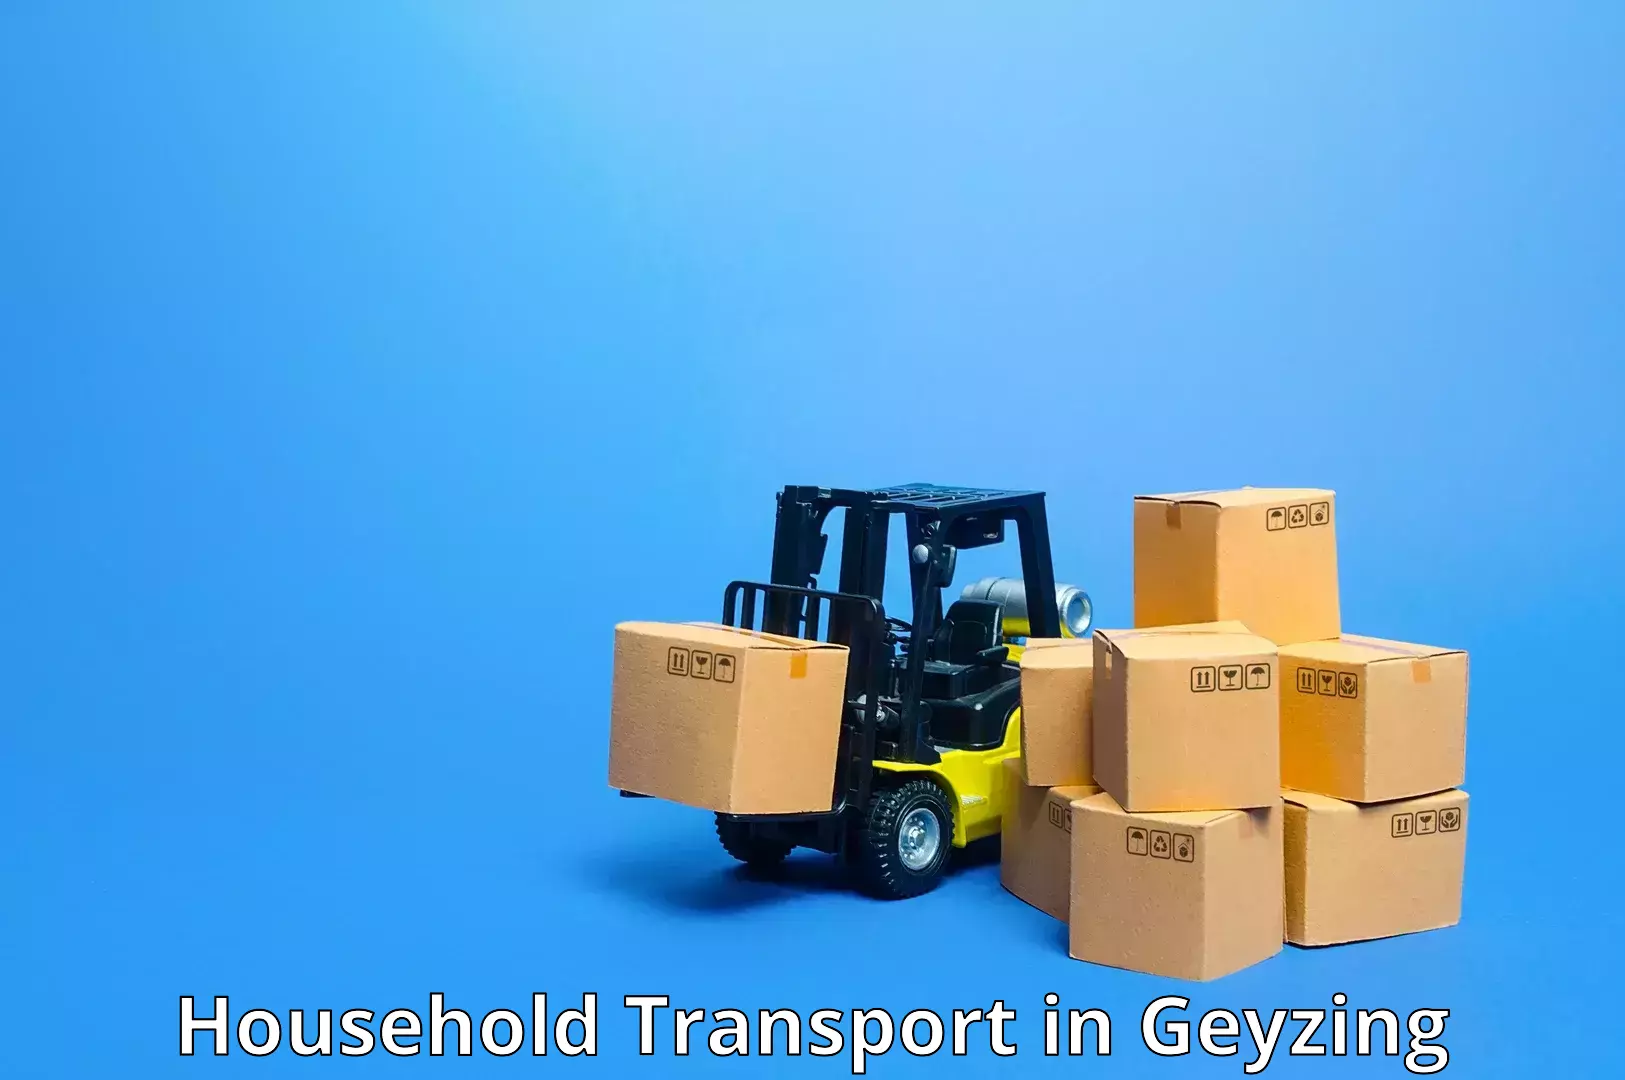 Furniture delivery service in Geyzing